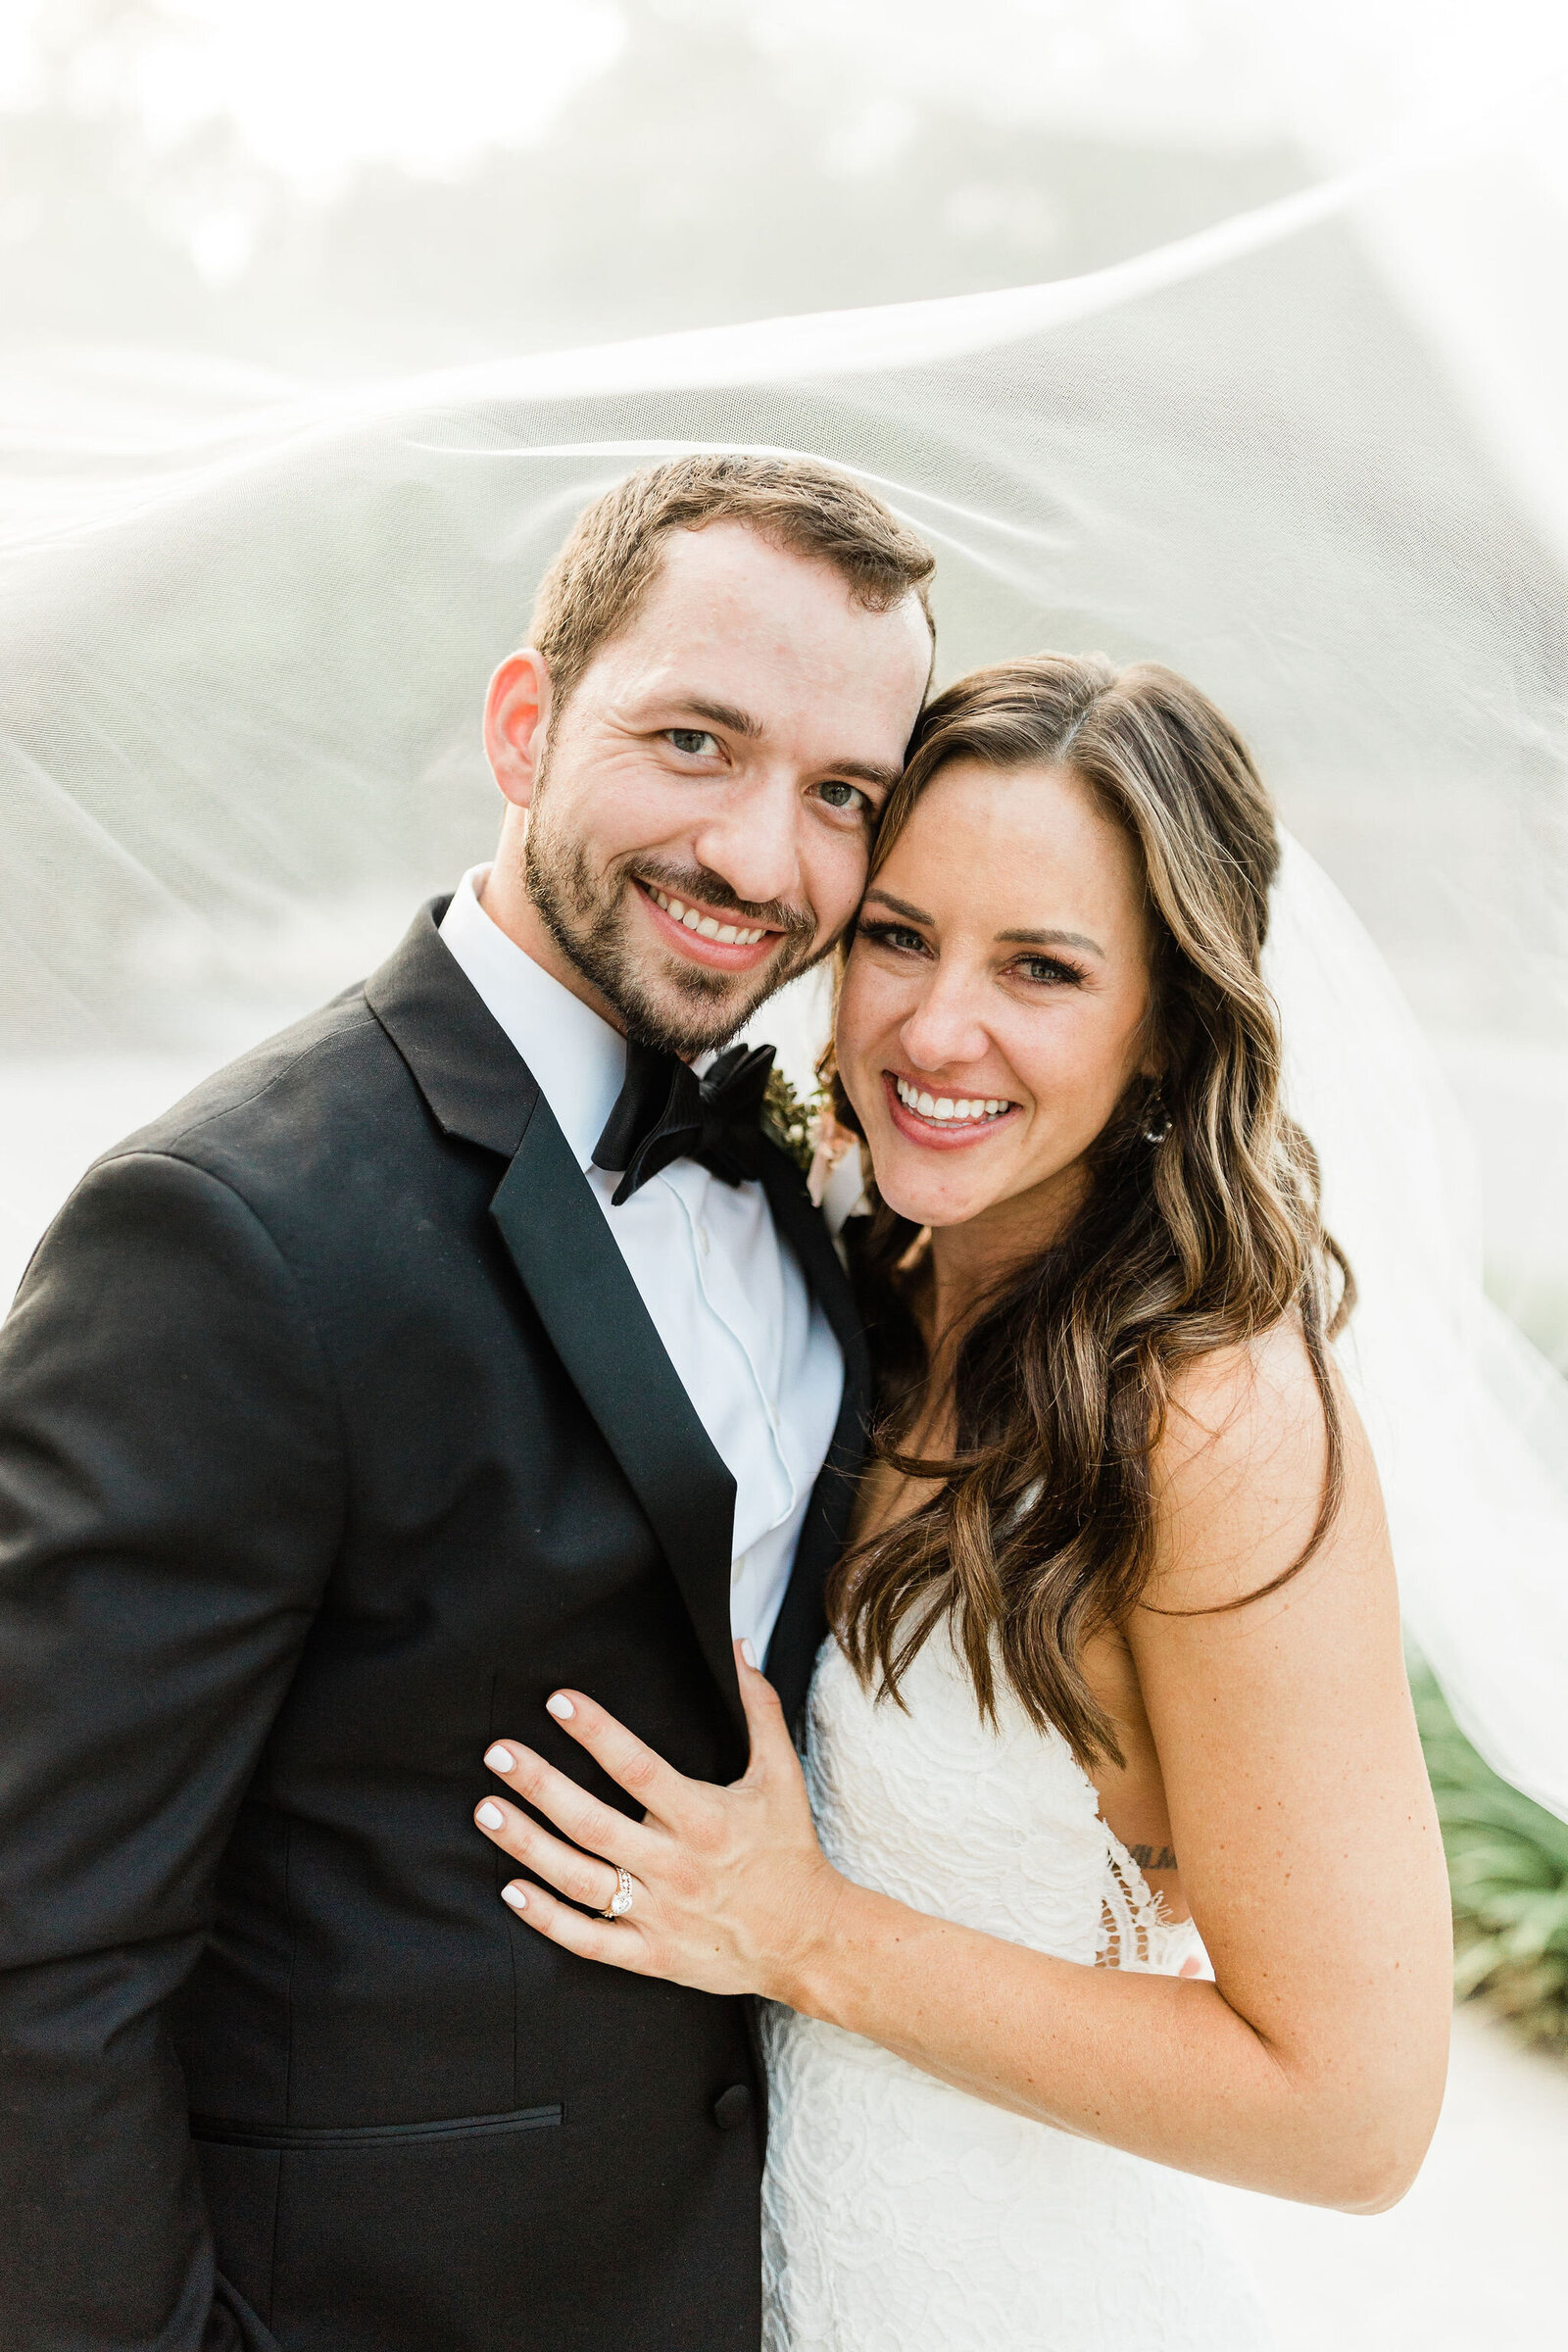 Under the Veil Wedding Day Photo | Wrightsville Manor, Wrightsville Beach NC | The Axtells Photo and Film